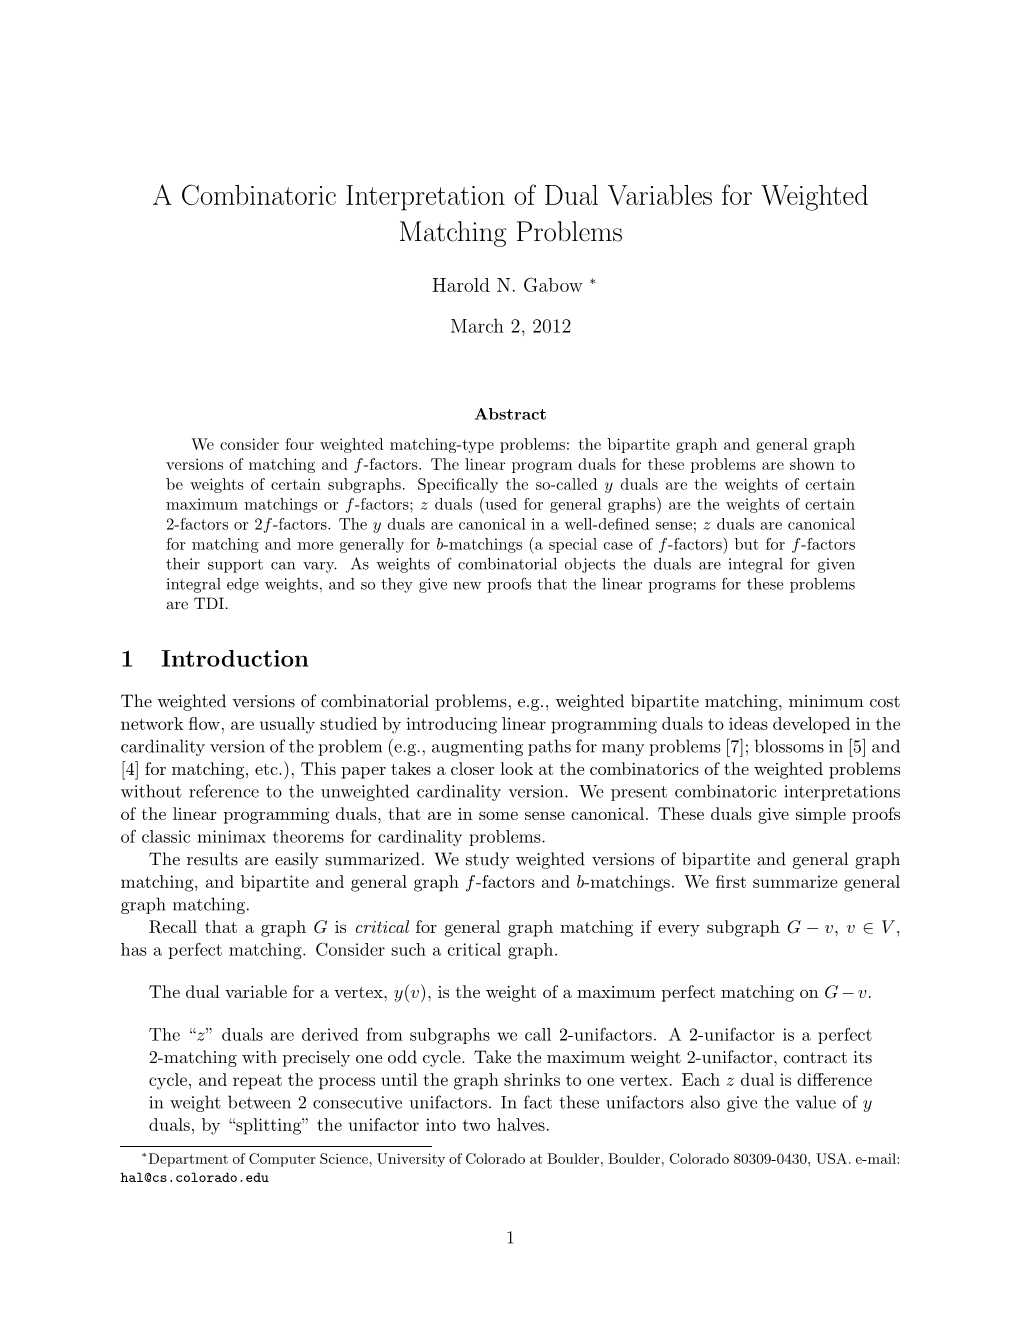 A Combinatoric Interpretation of Dual Variables for Weighted Matching Problems